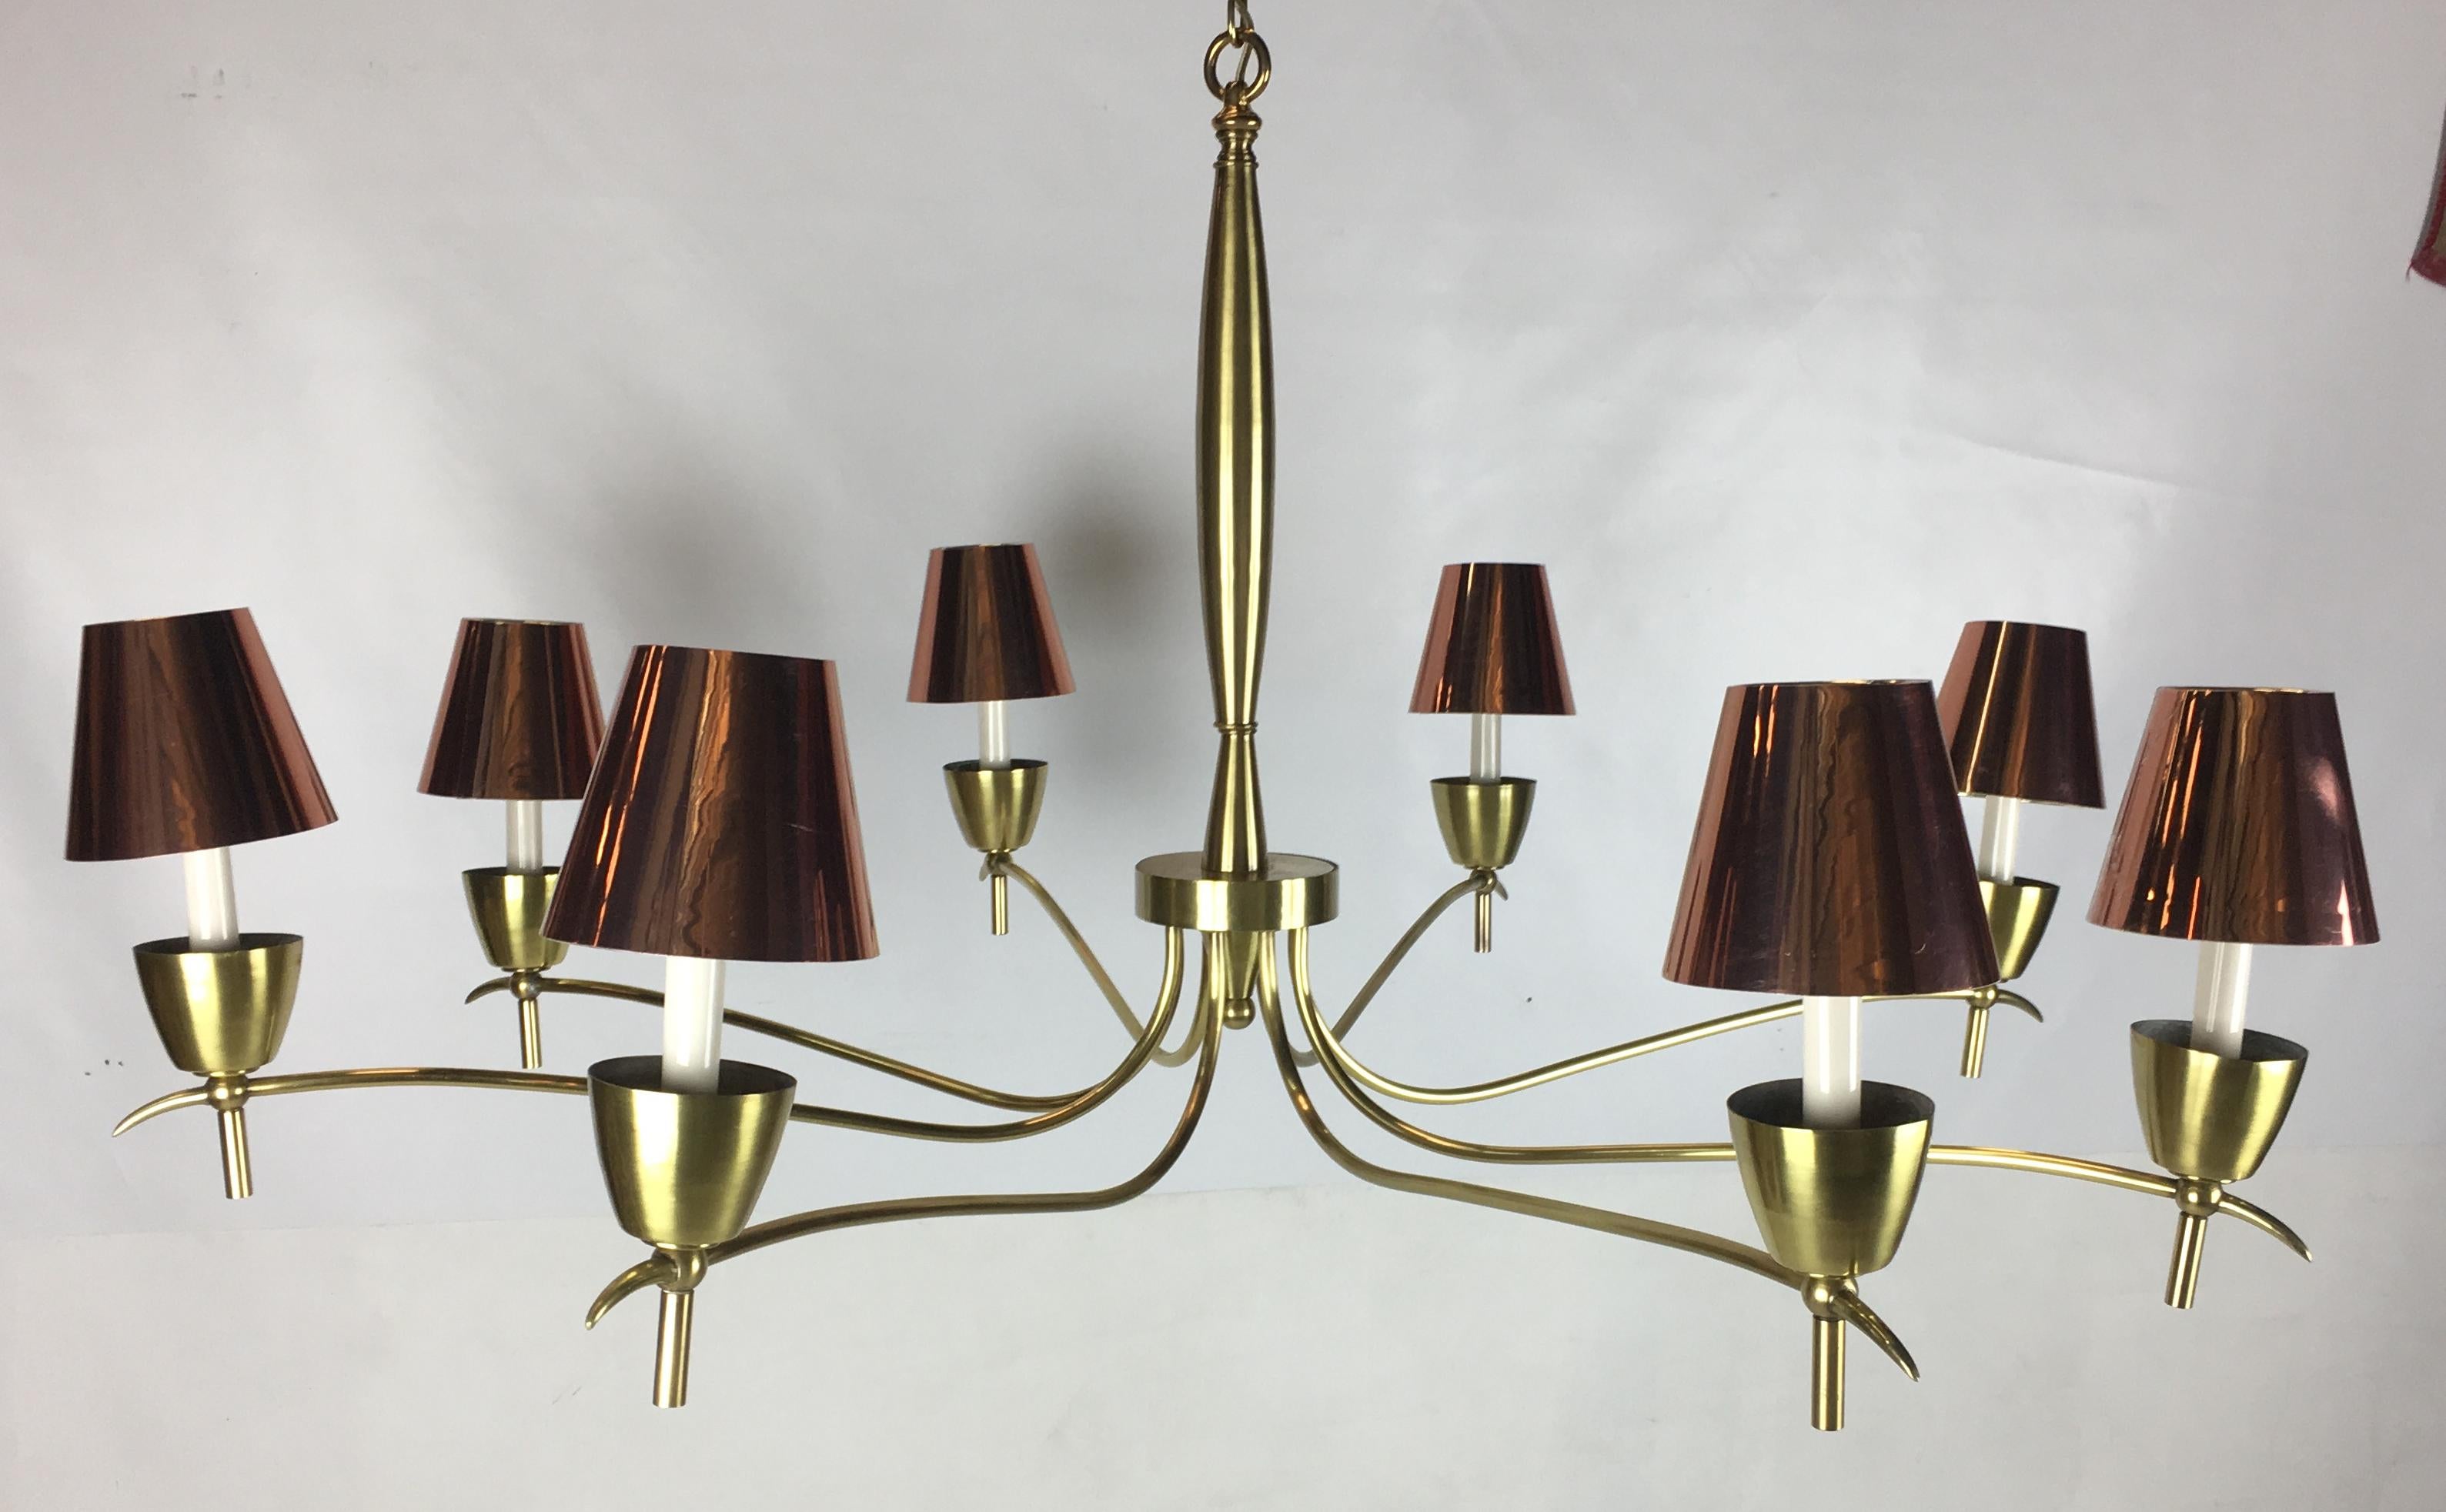 Spectacular brass chandelier with eight undulating arms. The piece has been completely restored with each element hand polished and lacquered before being rewired. The shades are not original to the chandelier and can be used or not.